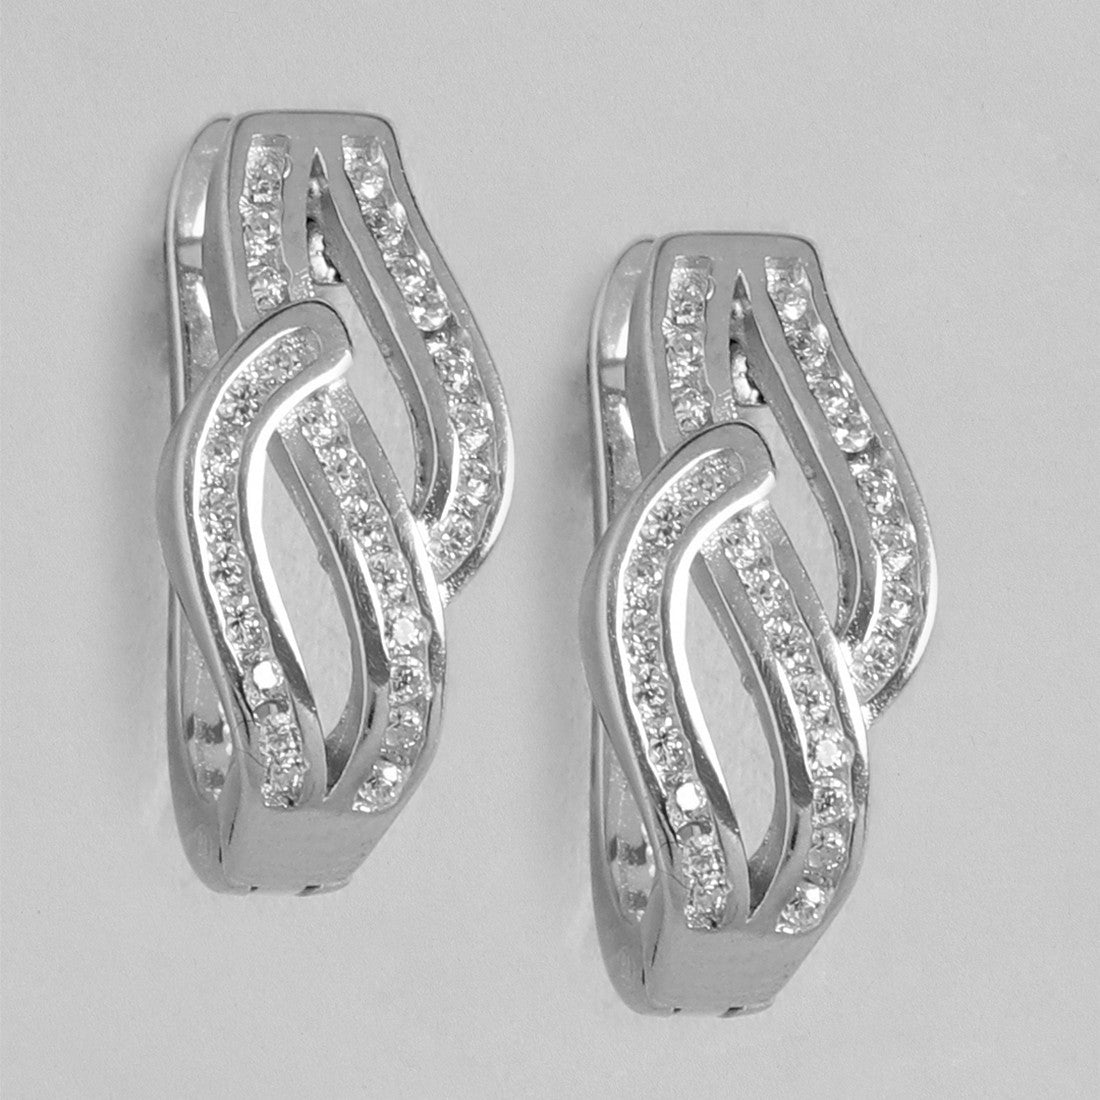 Rhodium Plated Contemporary CZ 925 Silver Earring